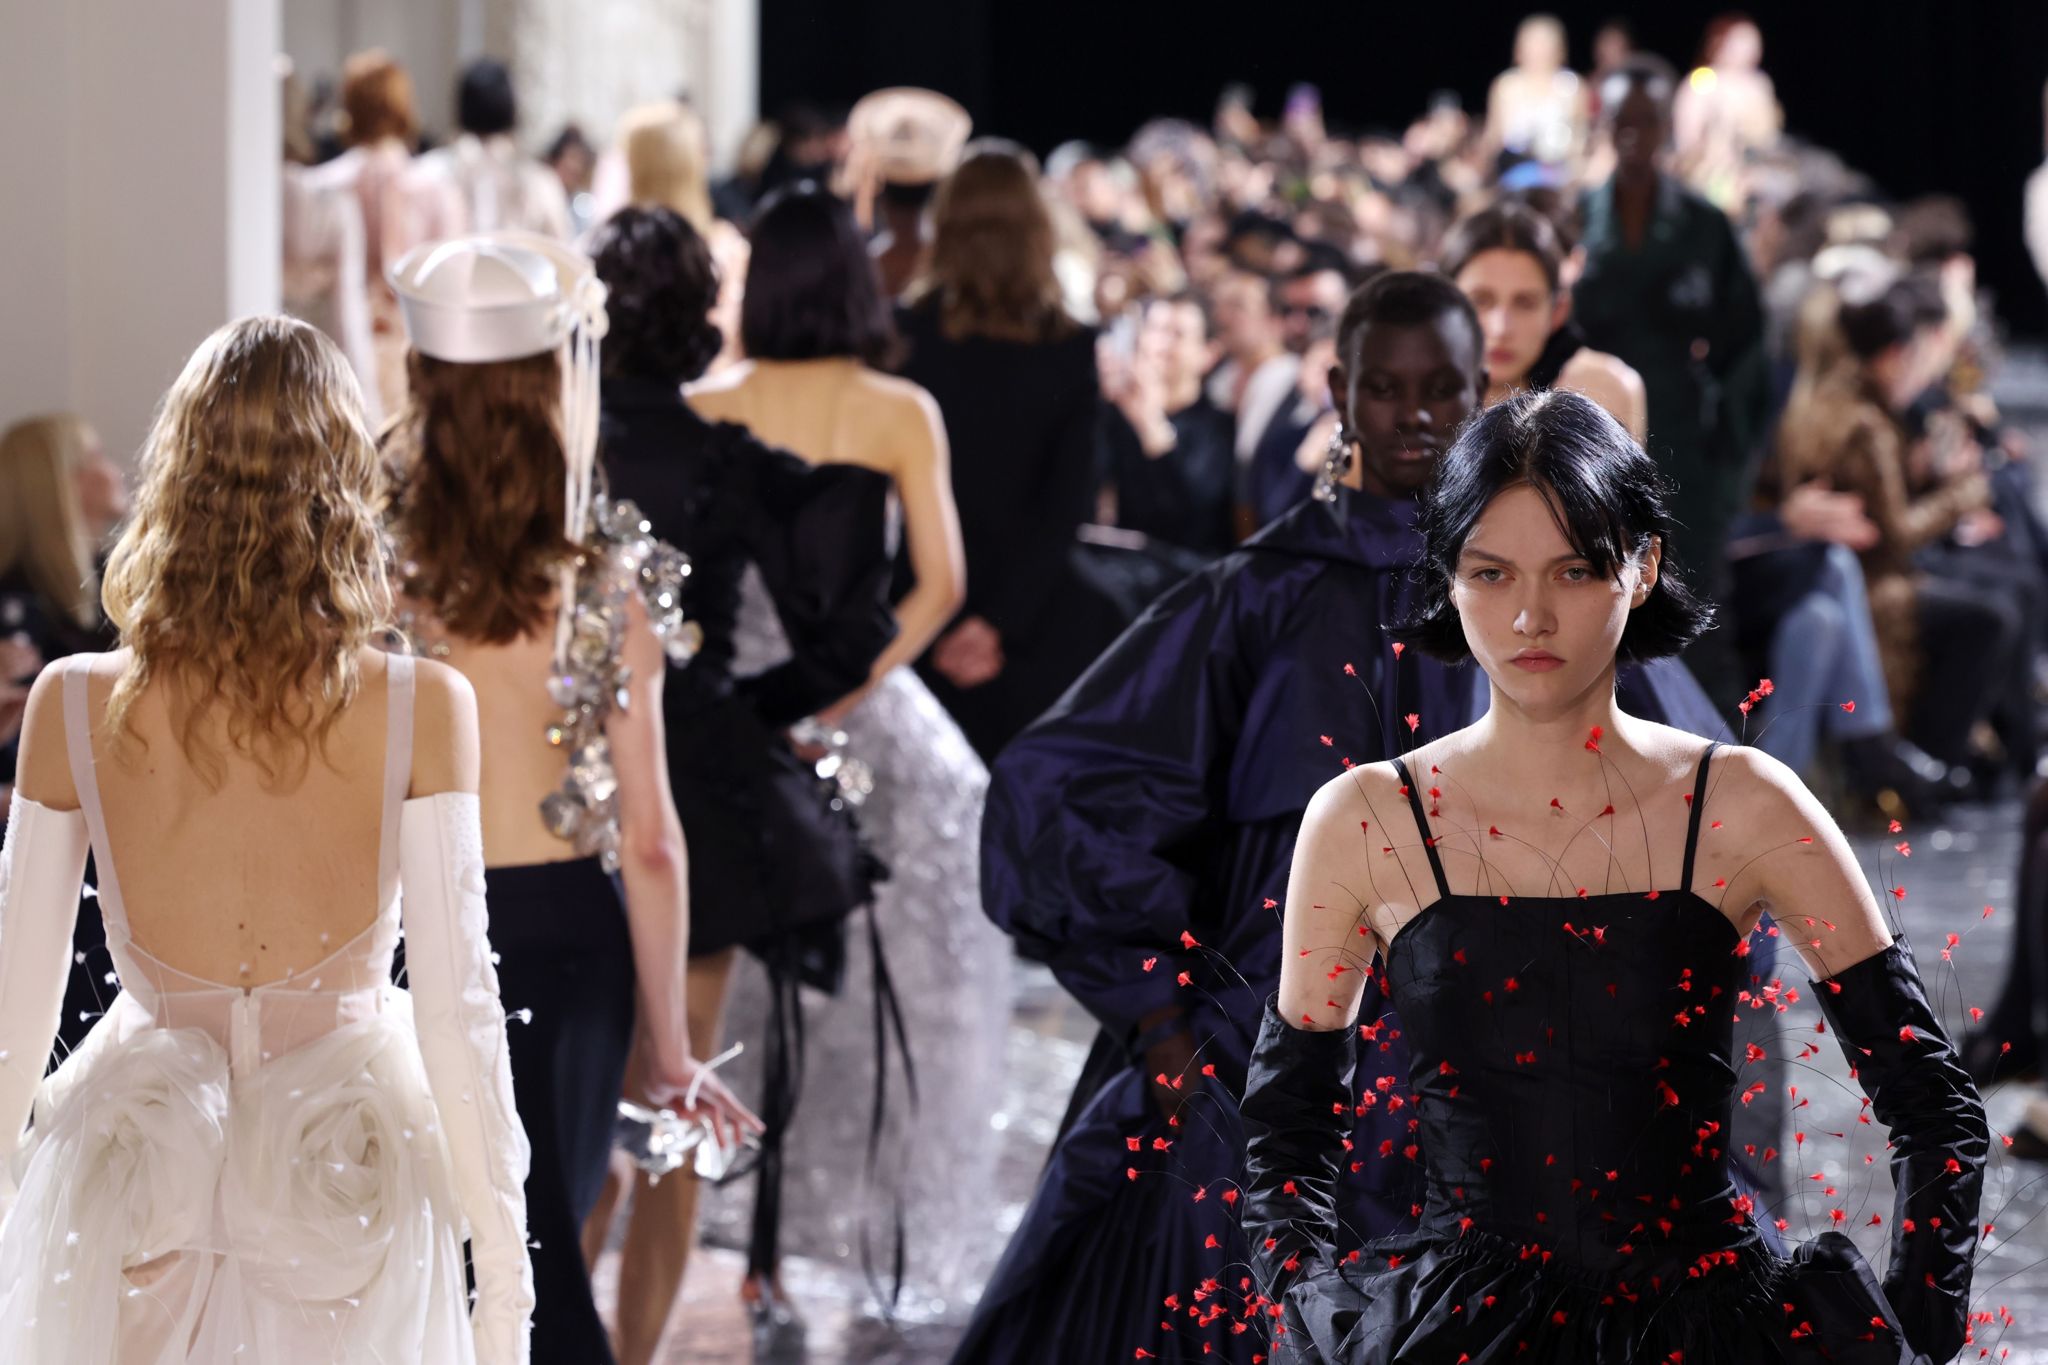 Models at Jean-Paul Gaultier couture show, designed by Simone Rocha